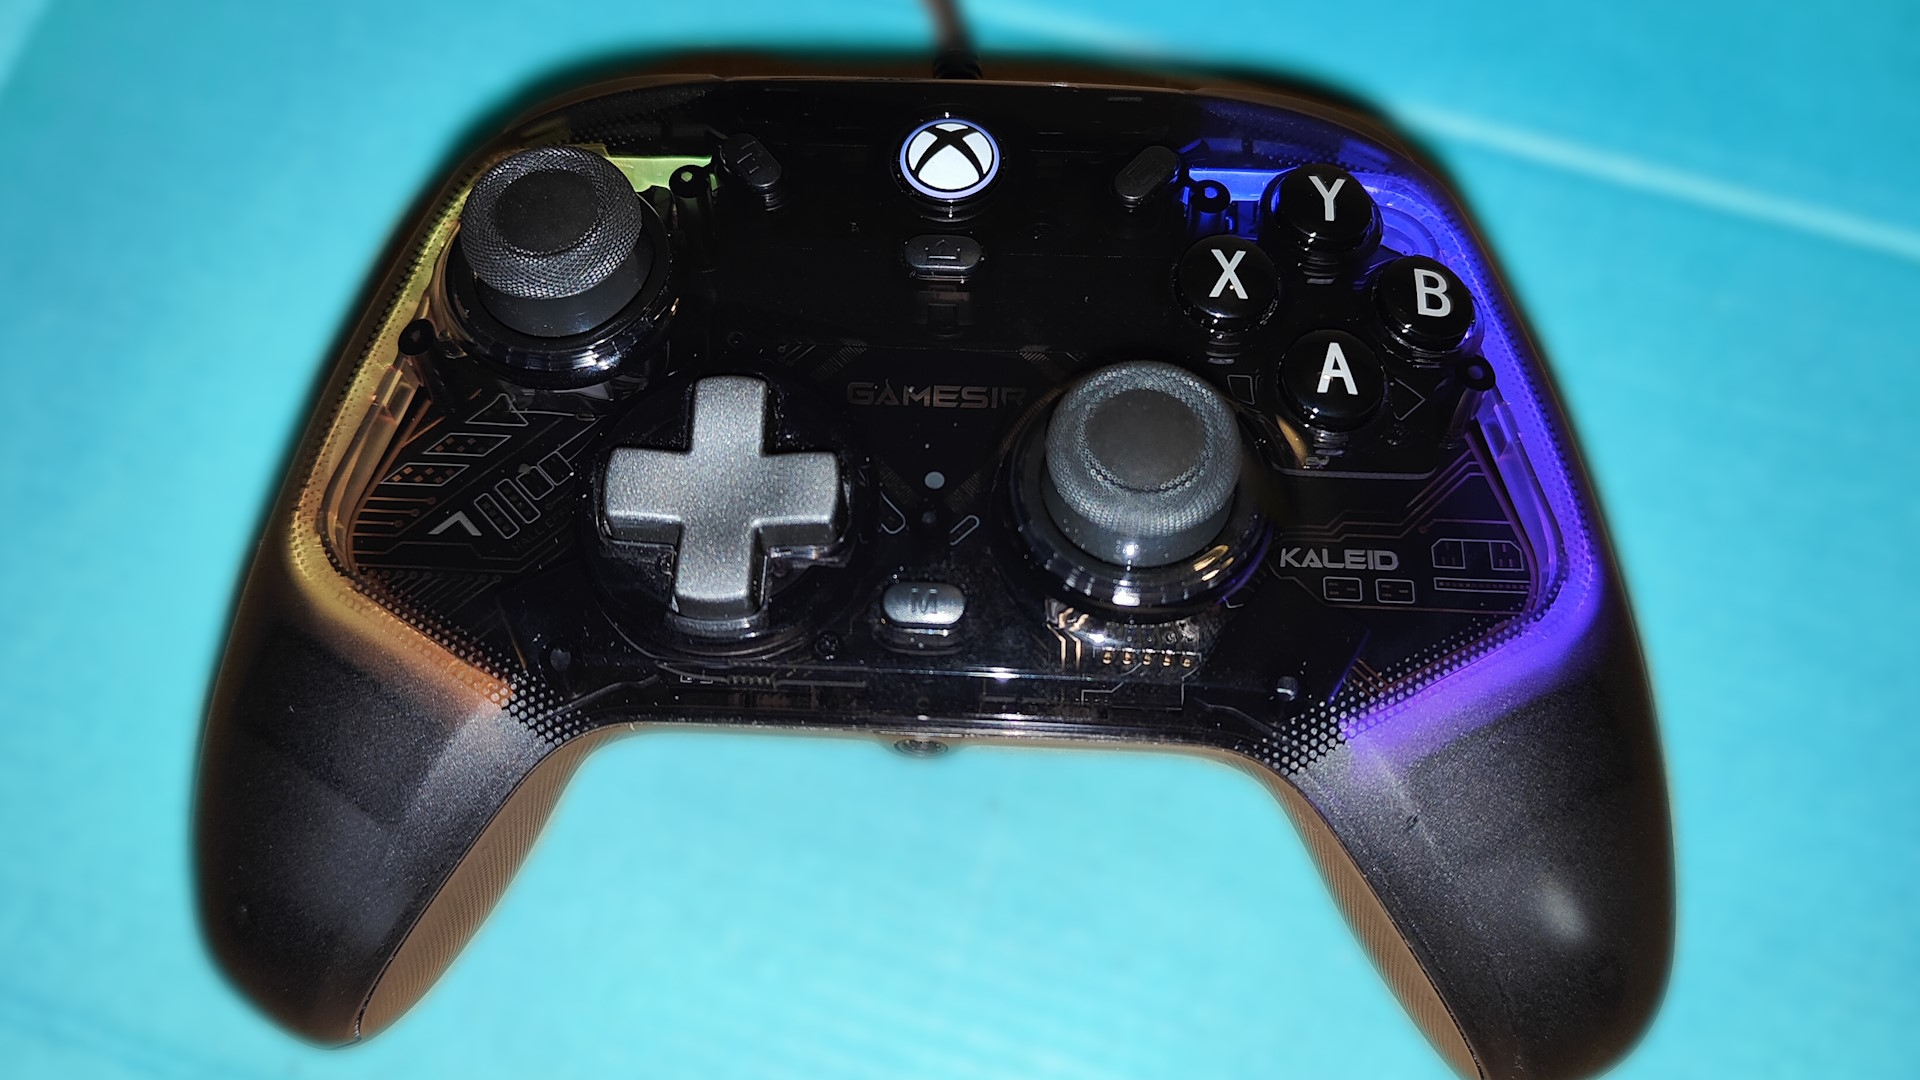  GameSir Kaleid Xbox Wired Controller Review